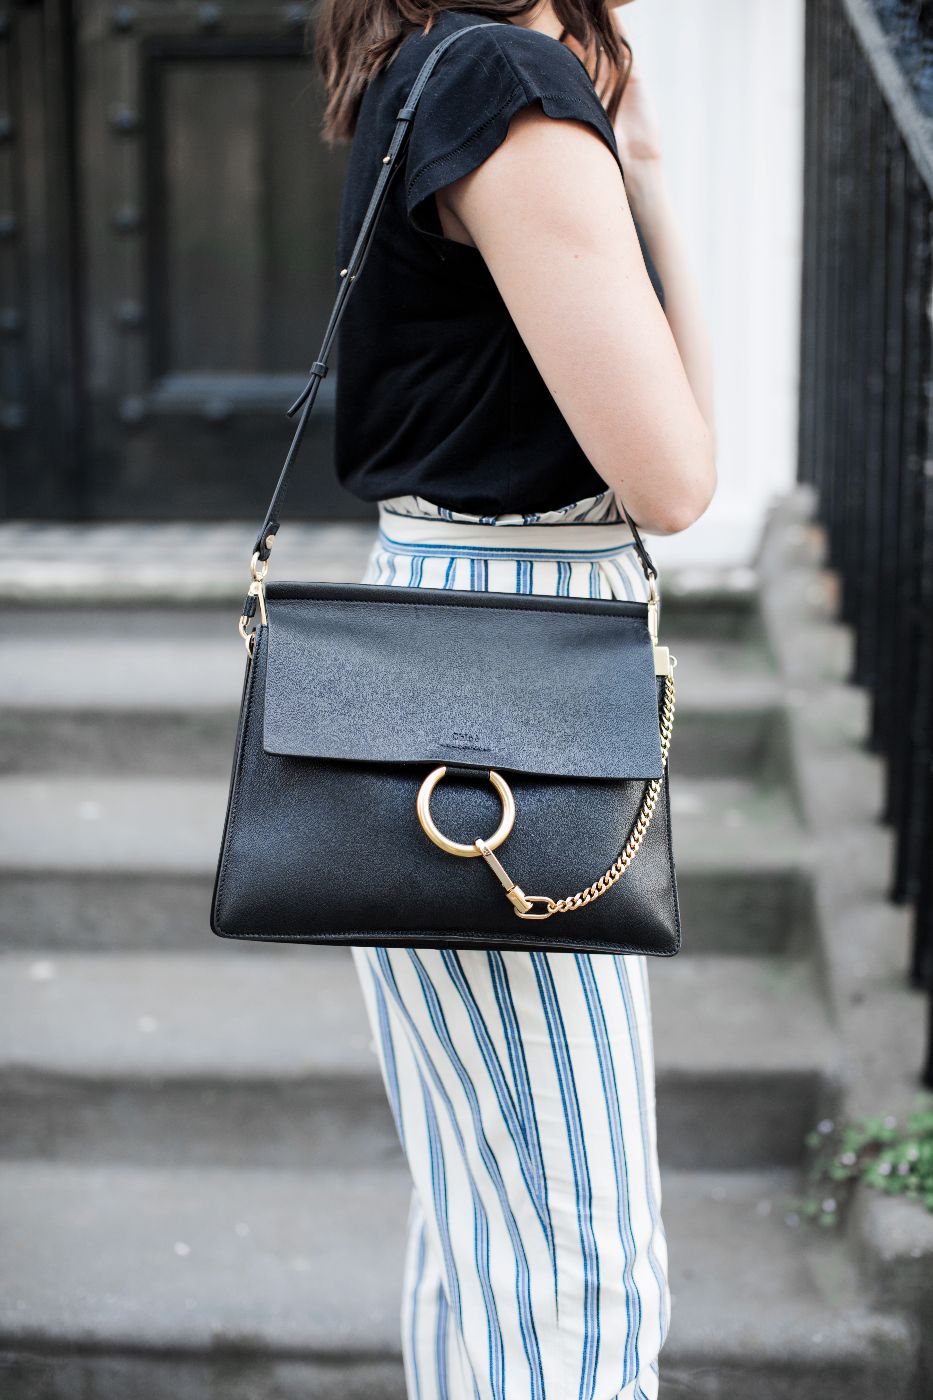 How To Make A Solid Fancy Bag Purchase – The Anna Edit